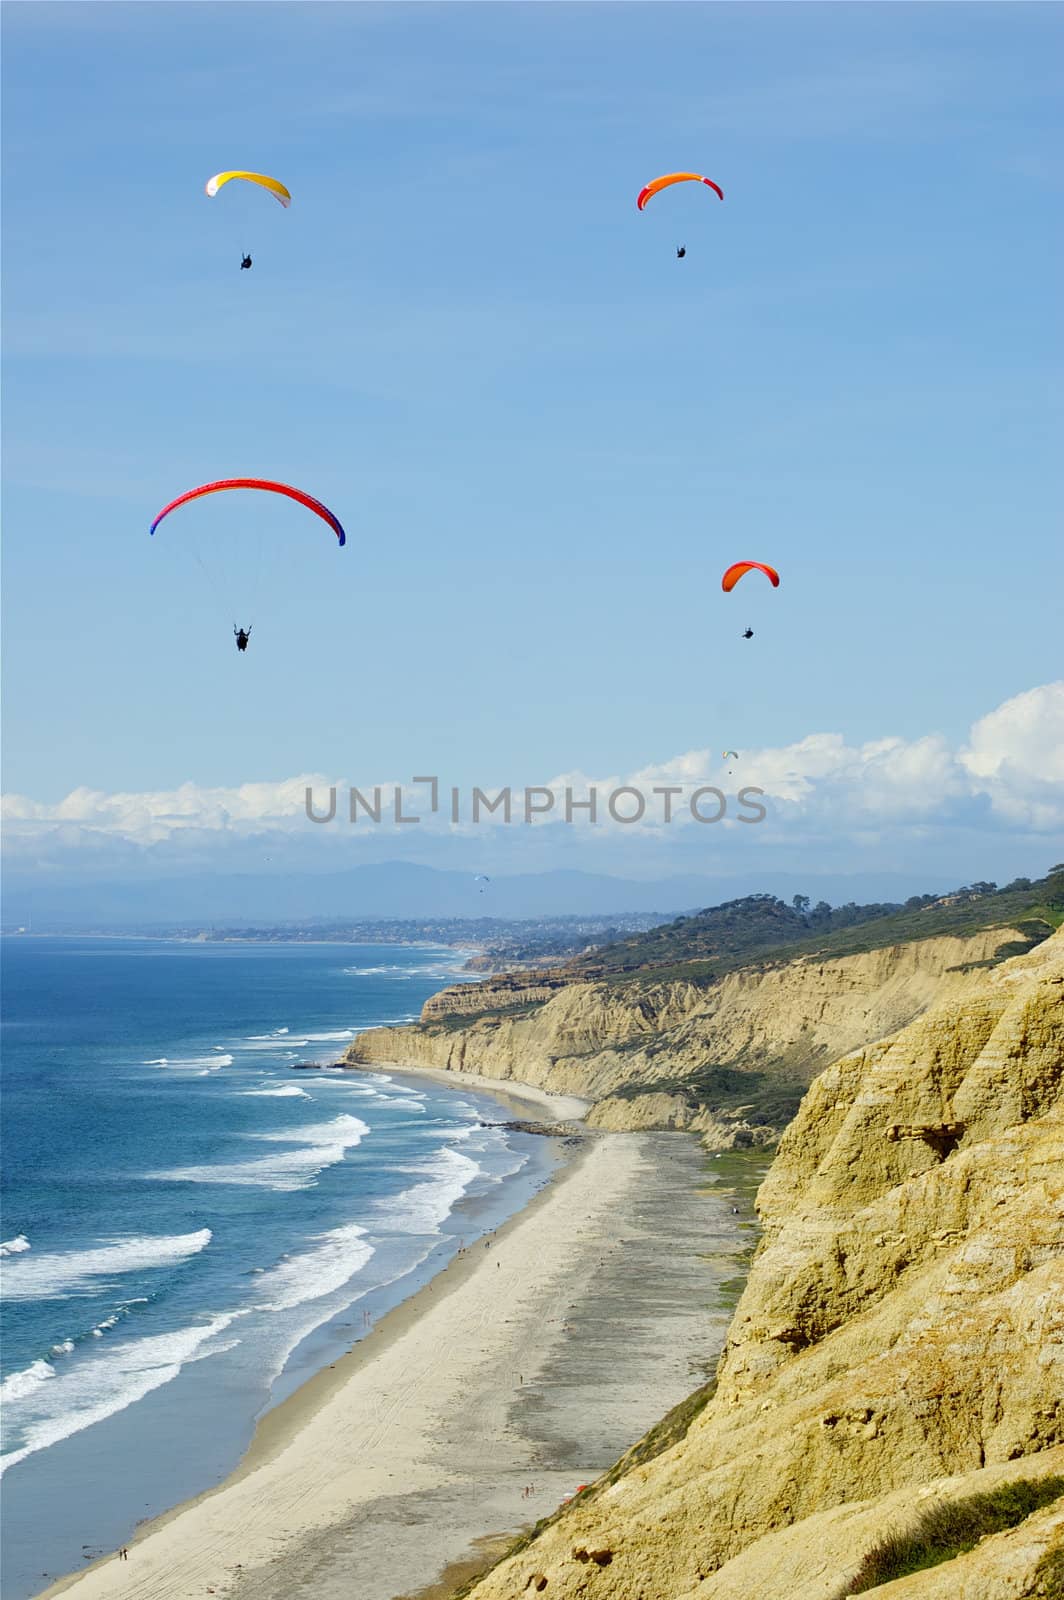 Four multicoloured hang gliders at different heights in sky over ocean next to rugged cliff with copy space.